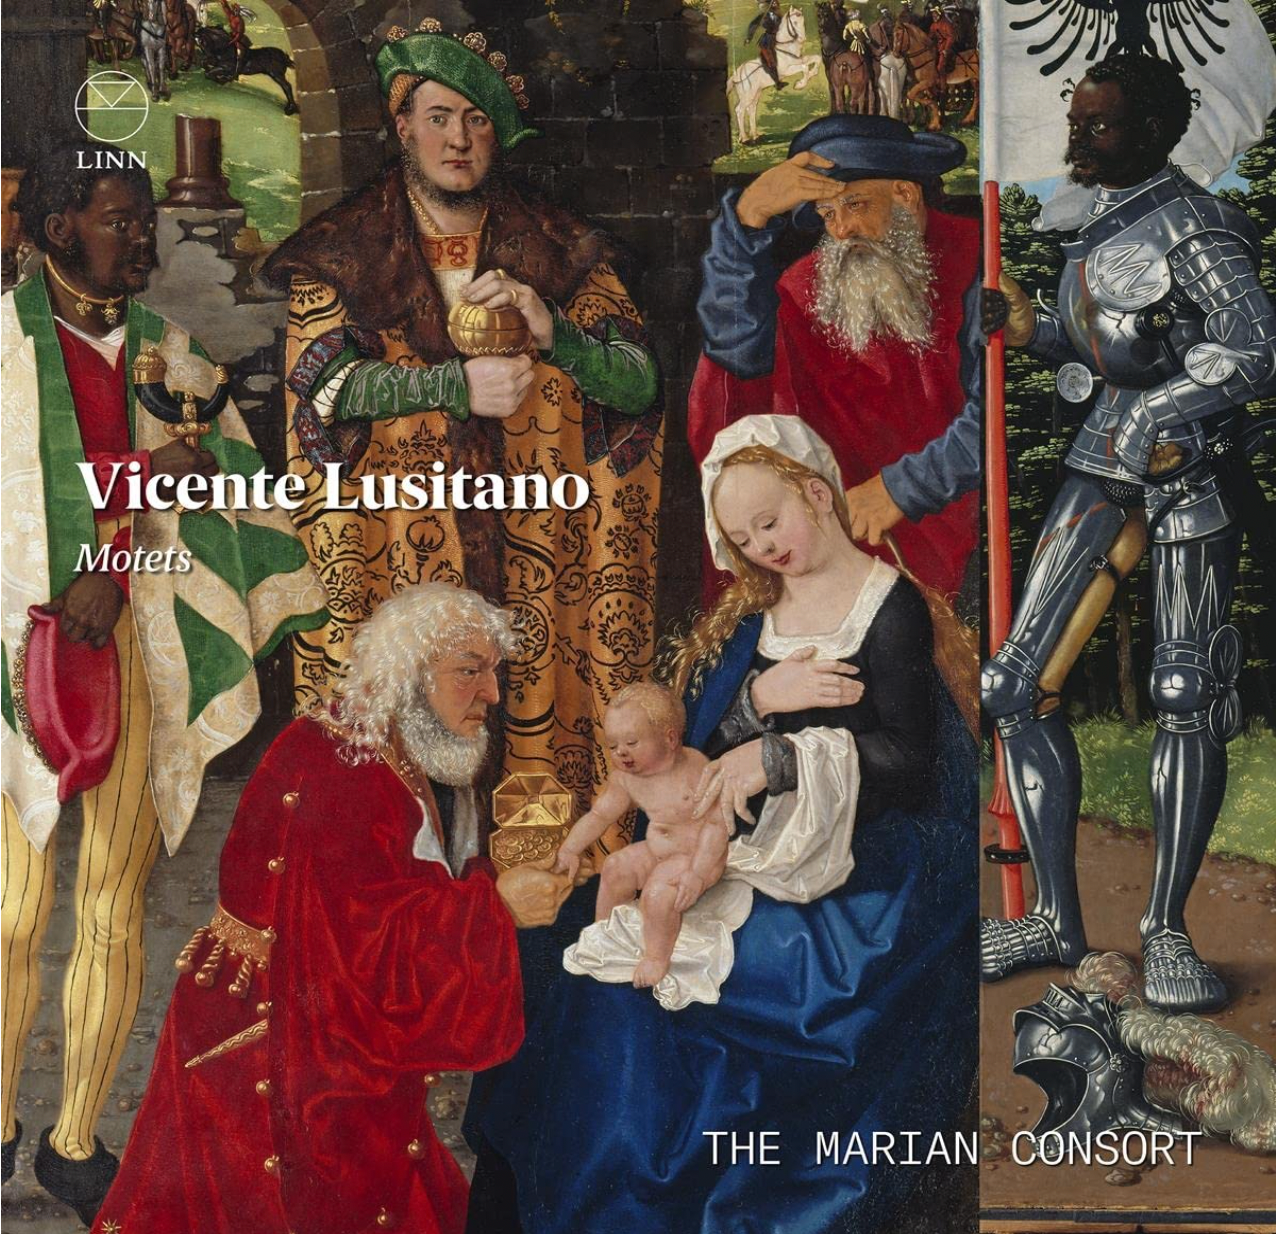 Vicente Lusitano Motets -  The Marian Consort